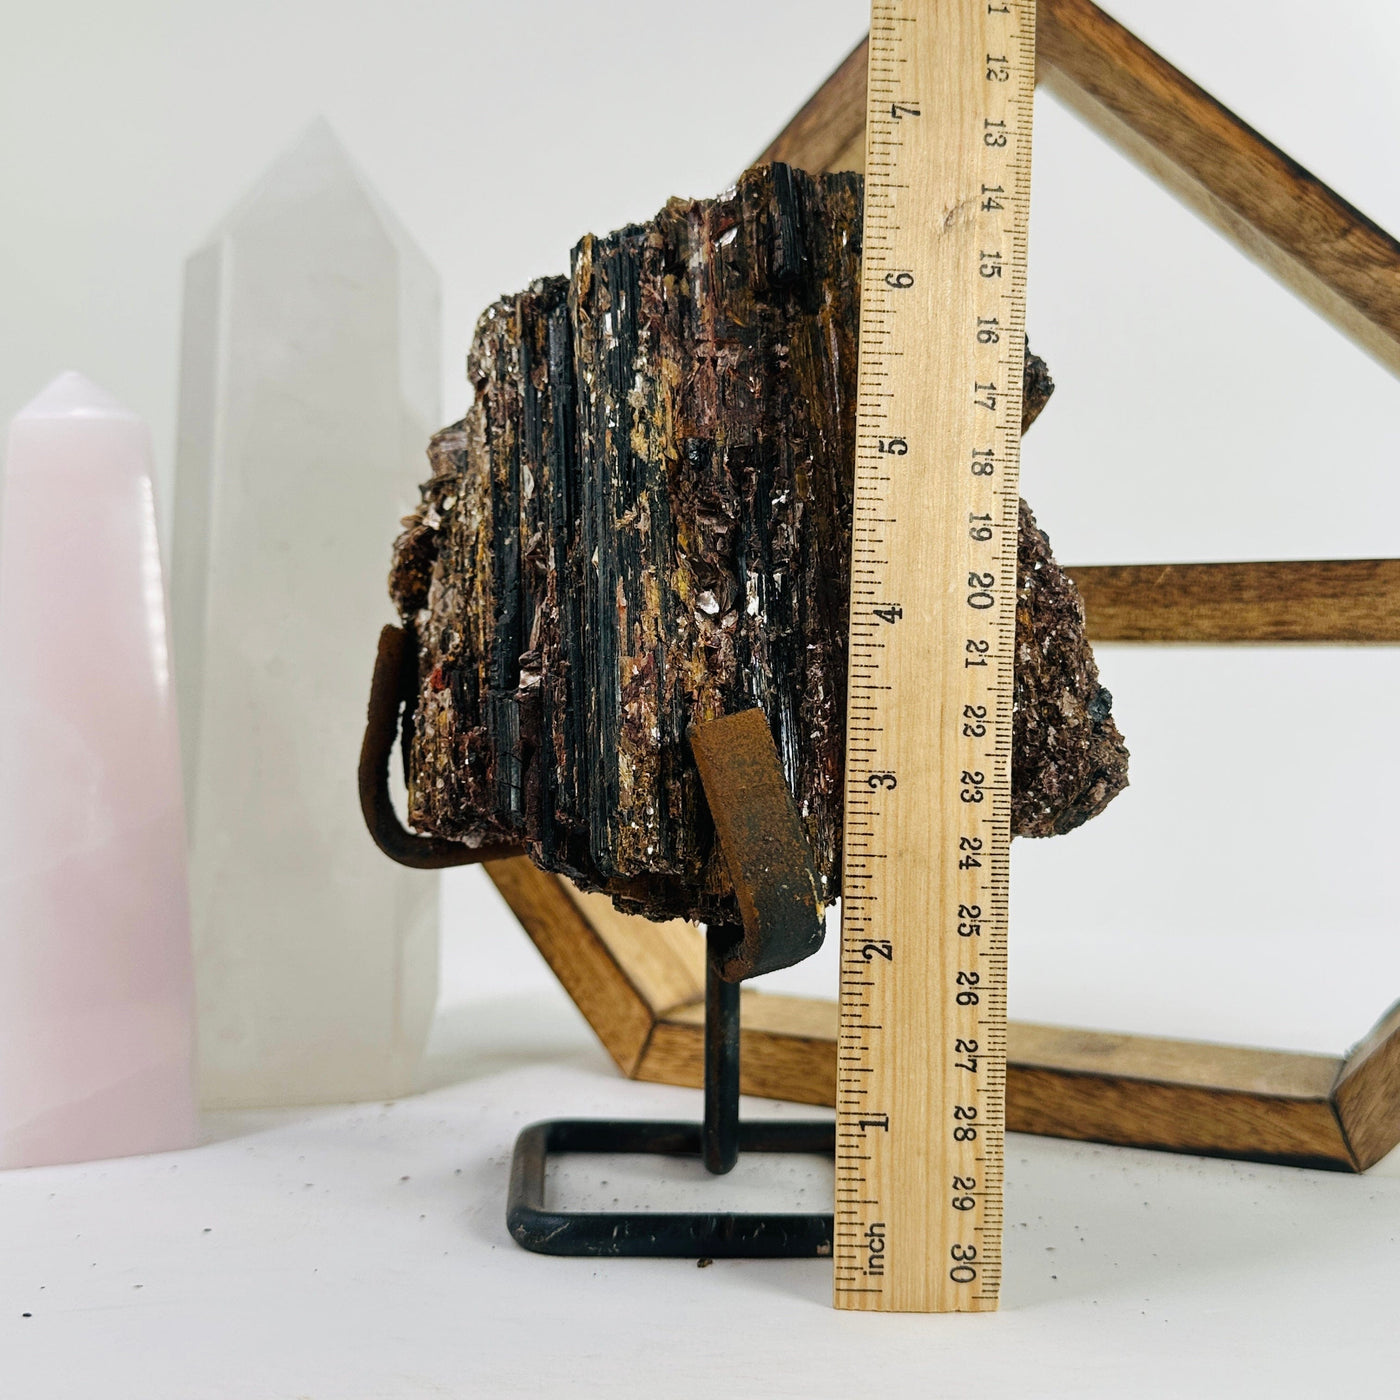 Tourmaline with mica on Metal stand next to a ruler for size reference